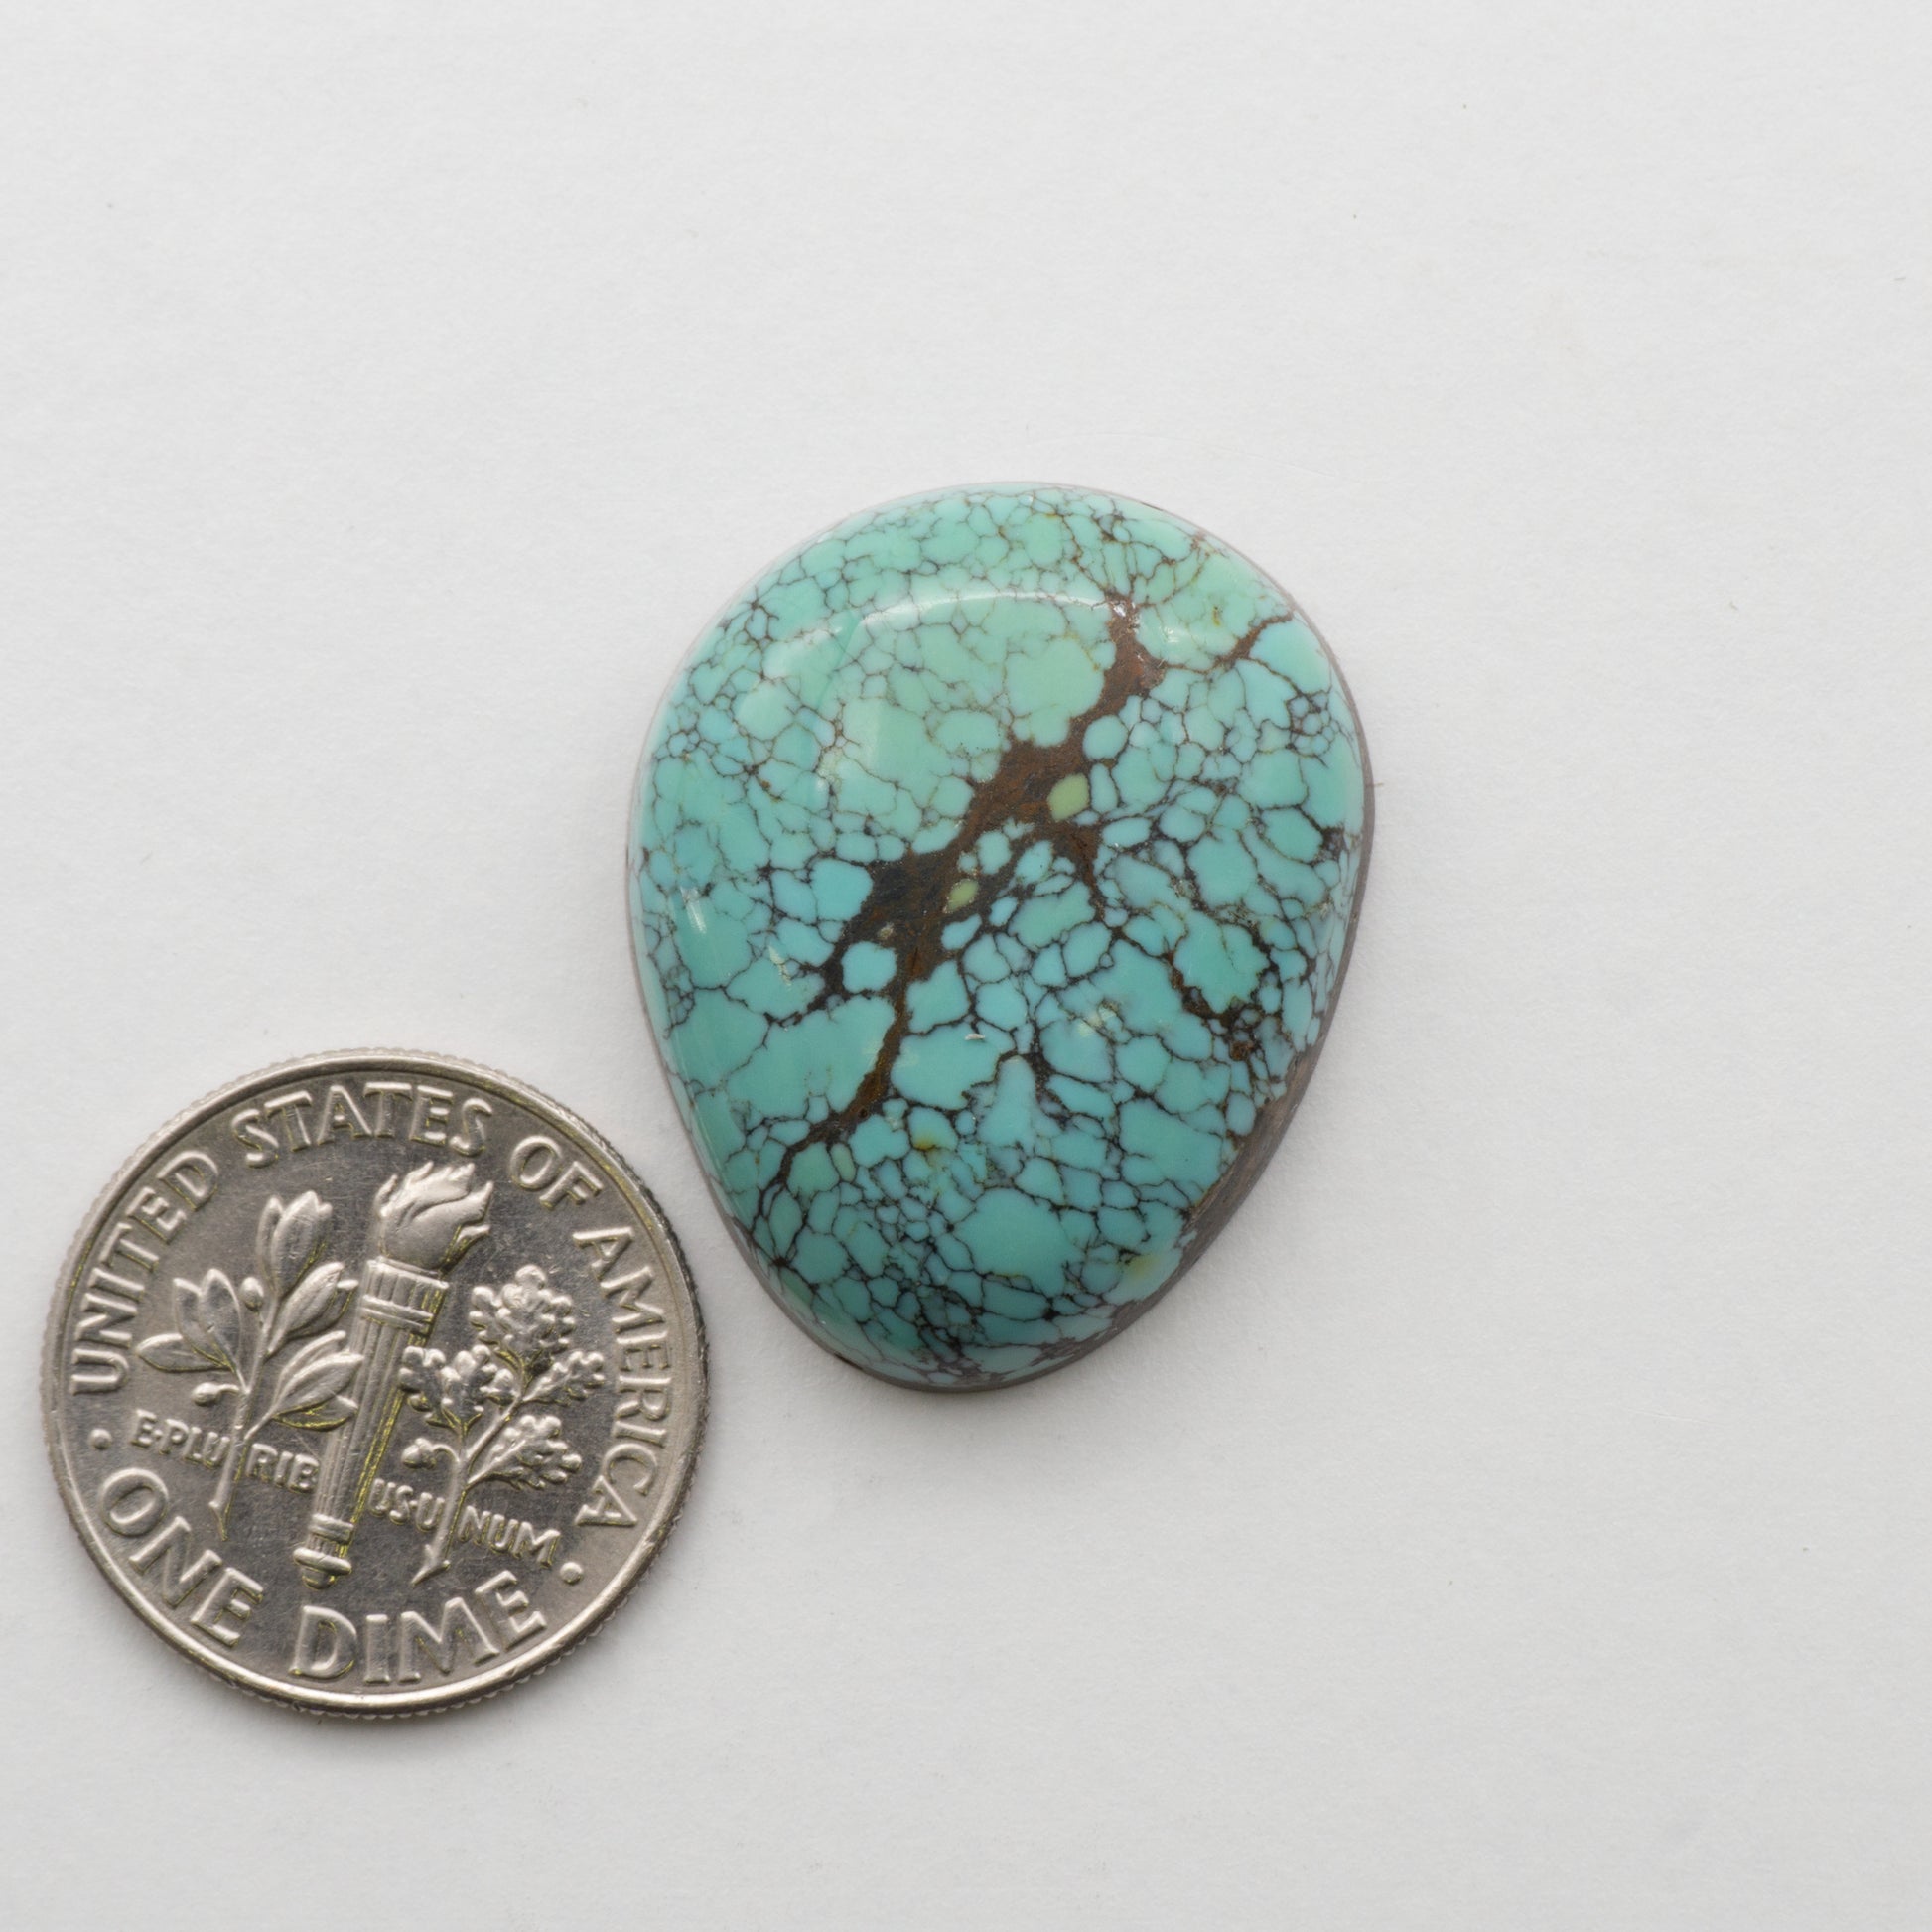 Blue Moon Turquoise cabochon